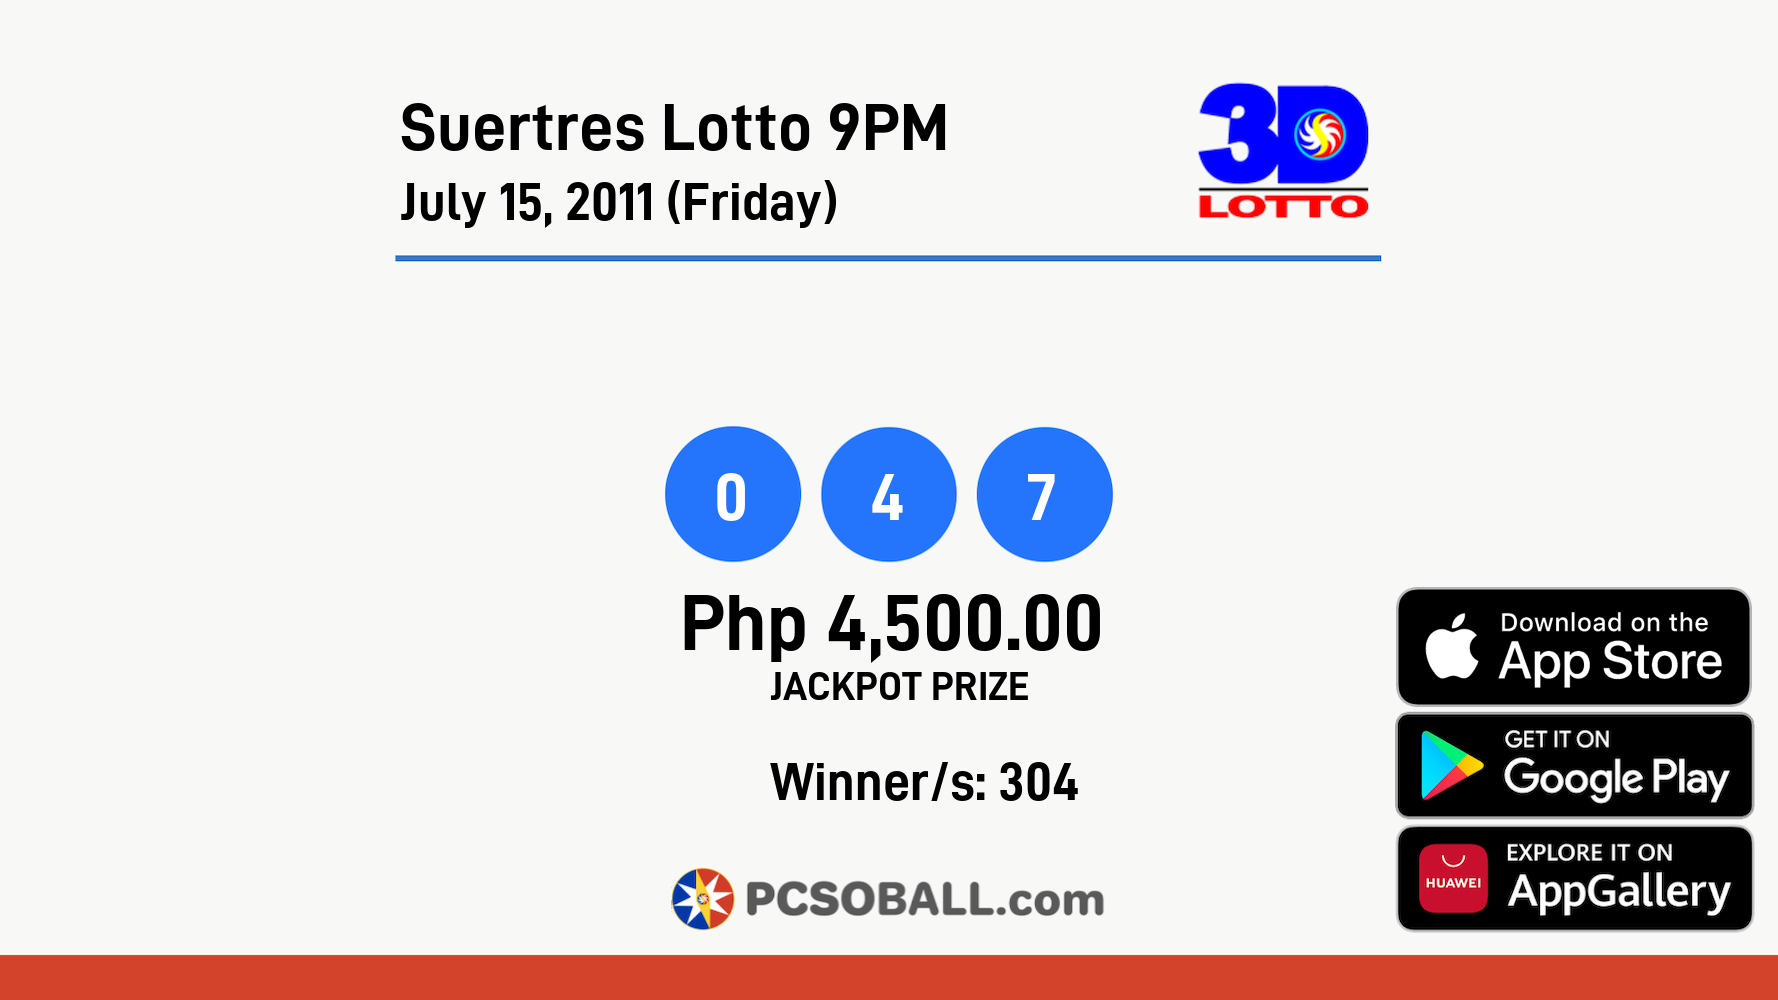 Suertres Lotto 9PM July 15, 2011 (Friday) Result